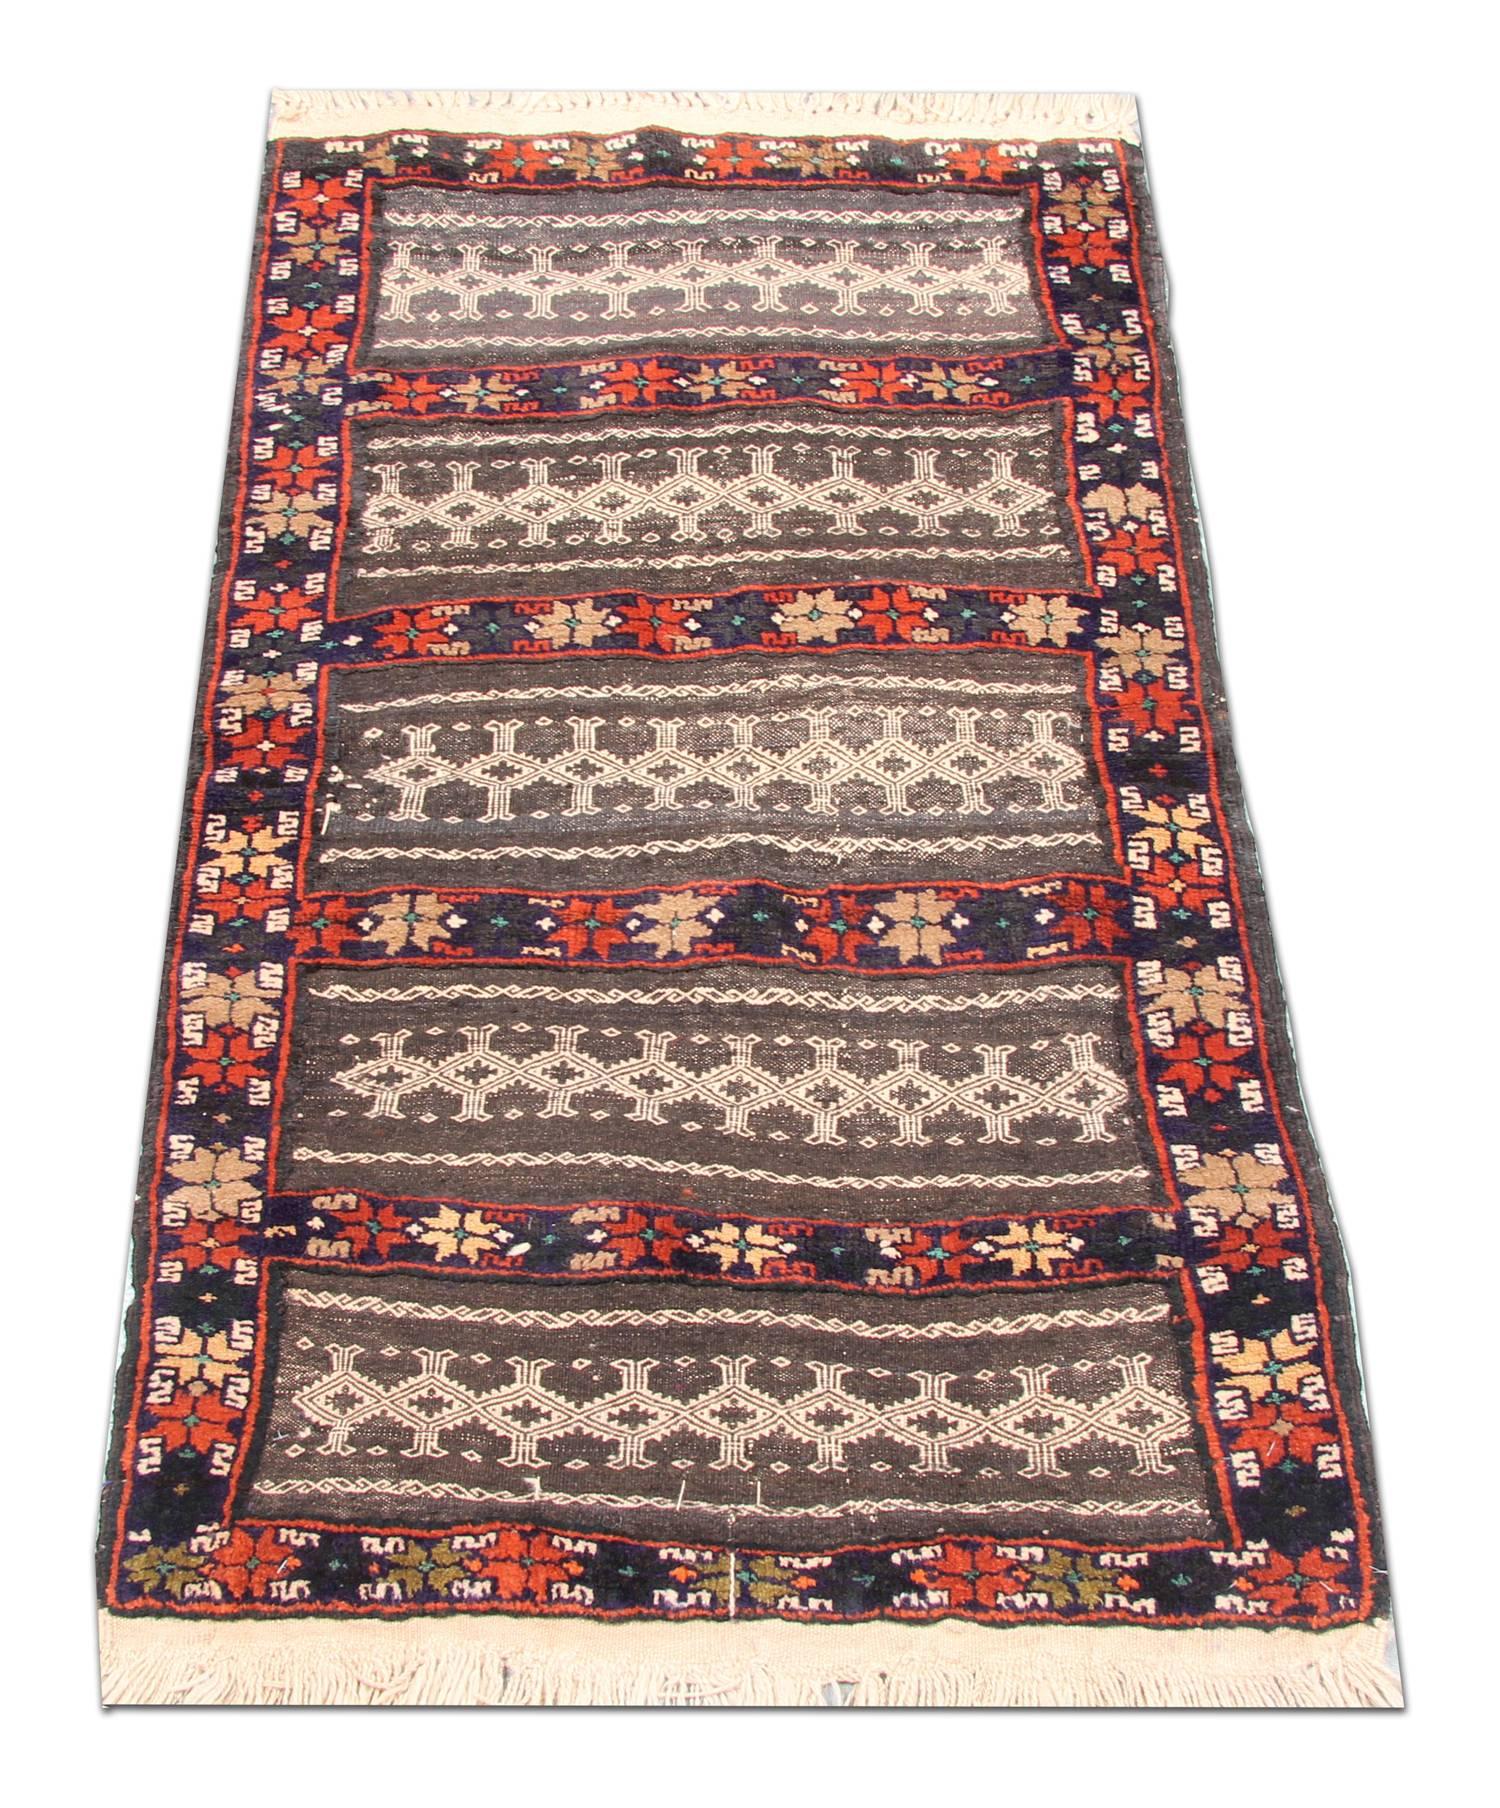 This traditional striped area rug has been intricately woven by hand. The central design features delicate symmetrical motifs with a mix of cream and brown stripes and red, blue and cream geometric pattern stripes. This is then framed by the same